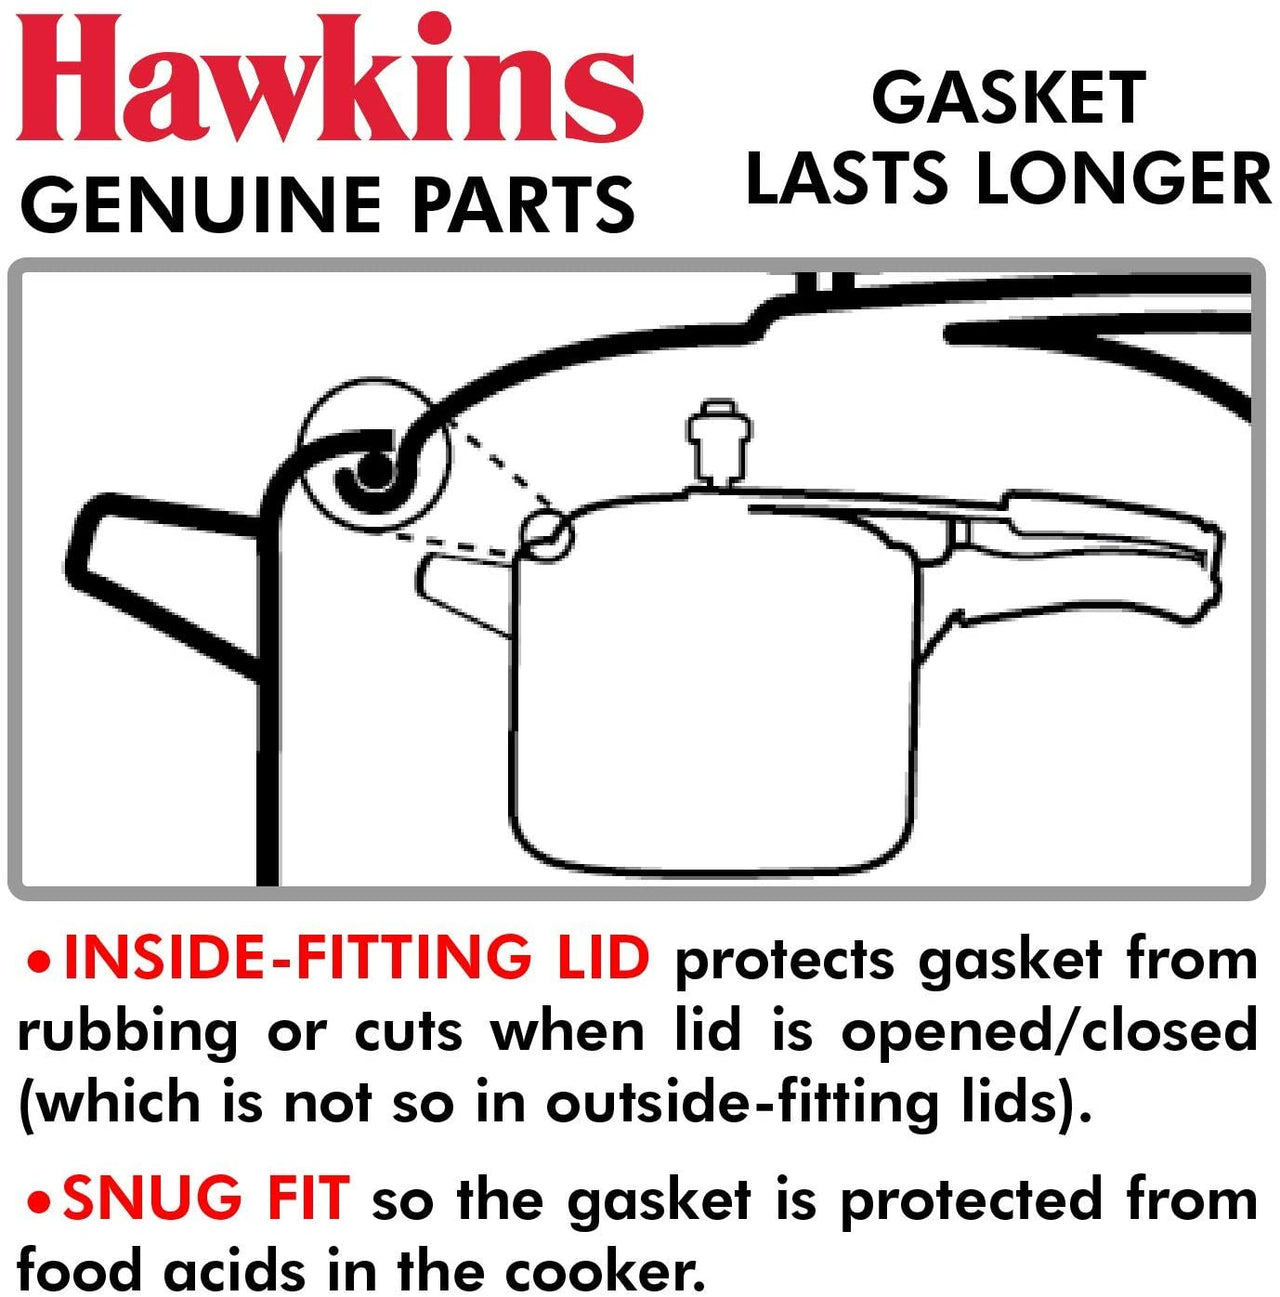 Hawkins A10-09 Gasket Sealing Ring for Pressure Cookers, 2 to 4-Liter